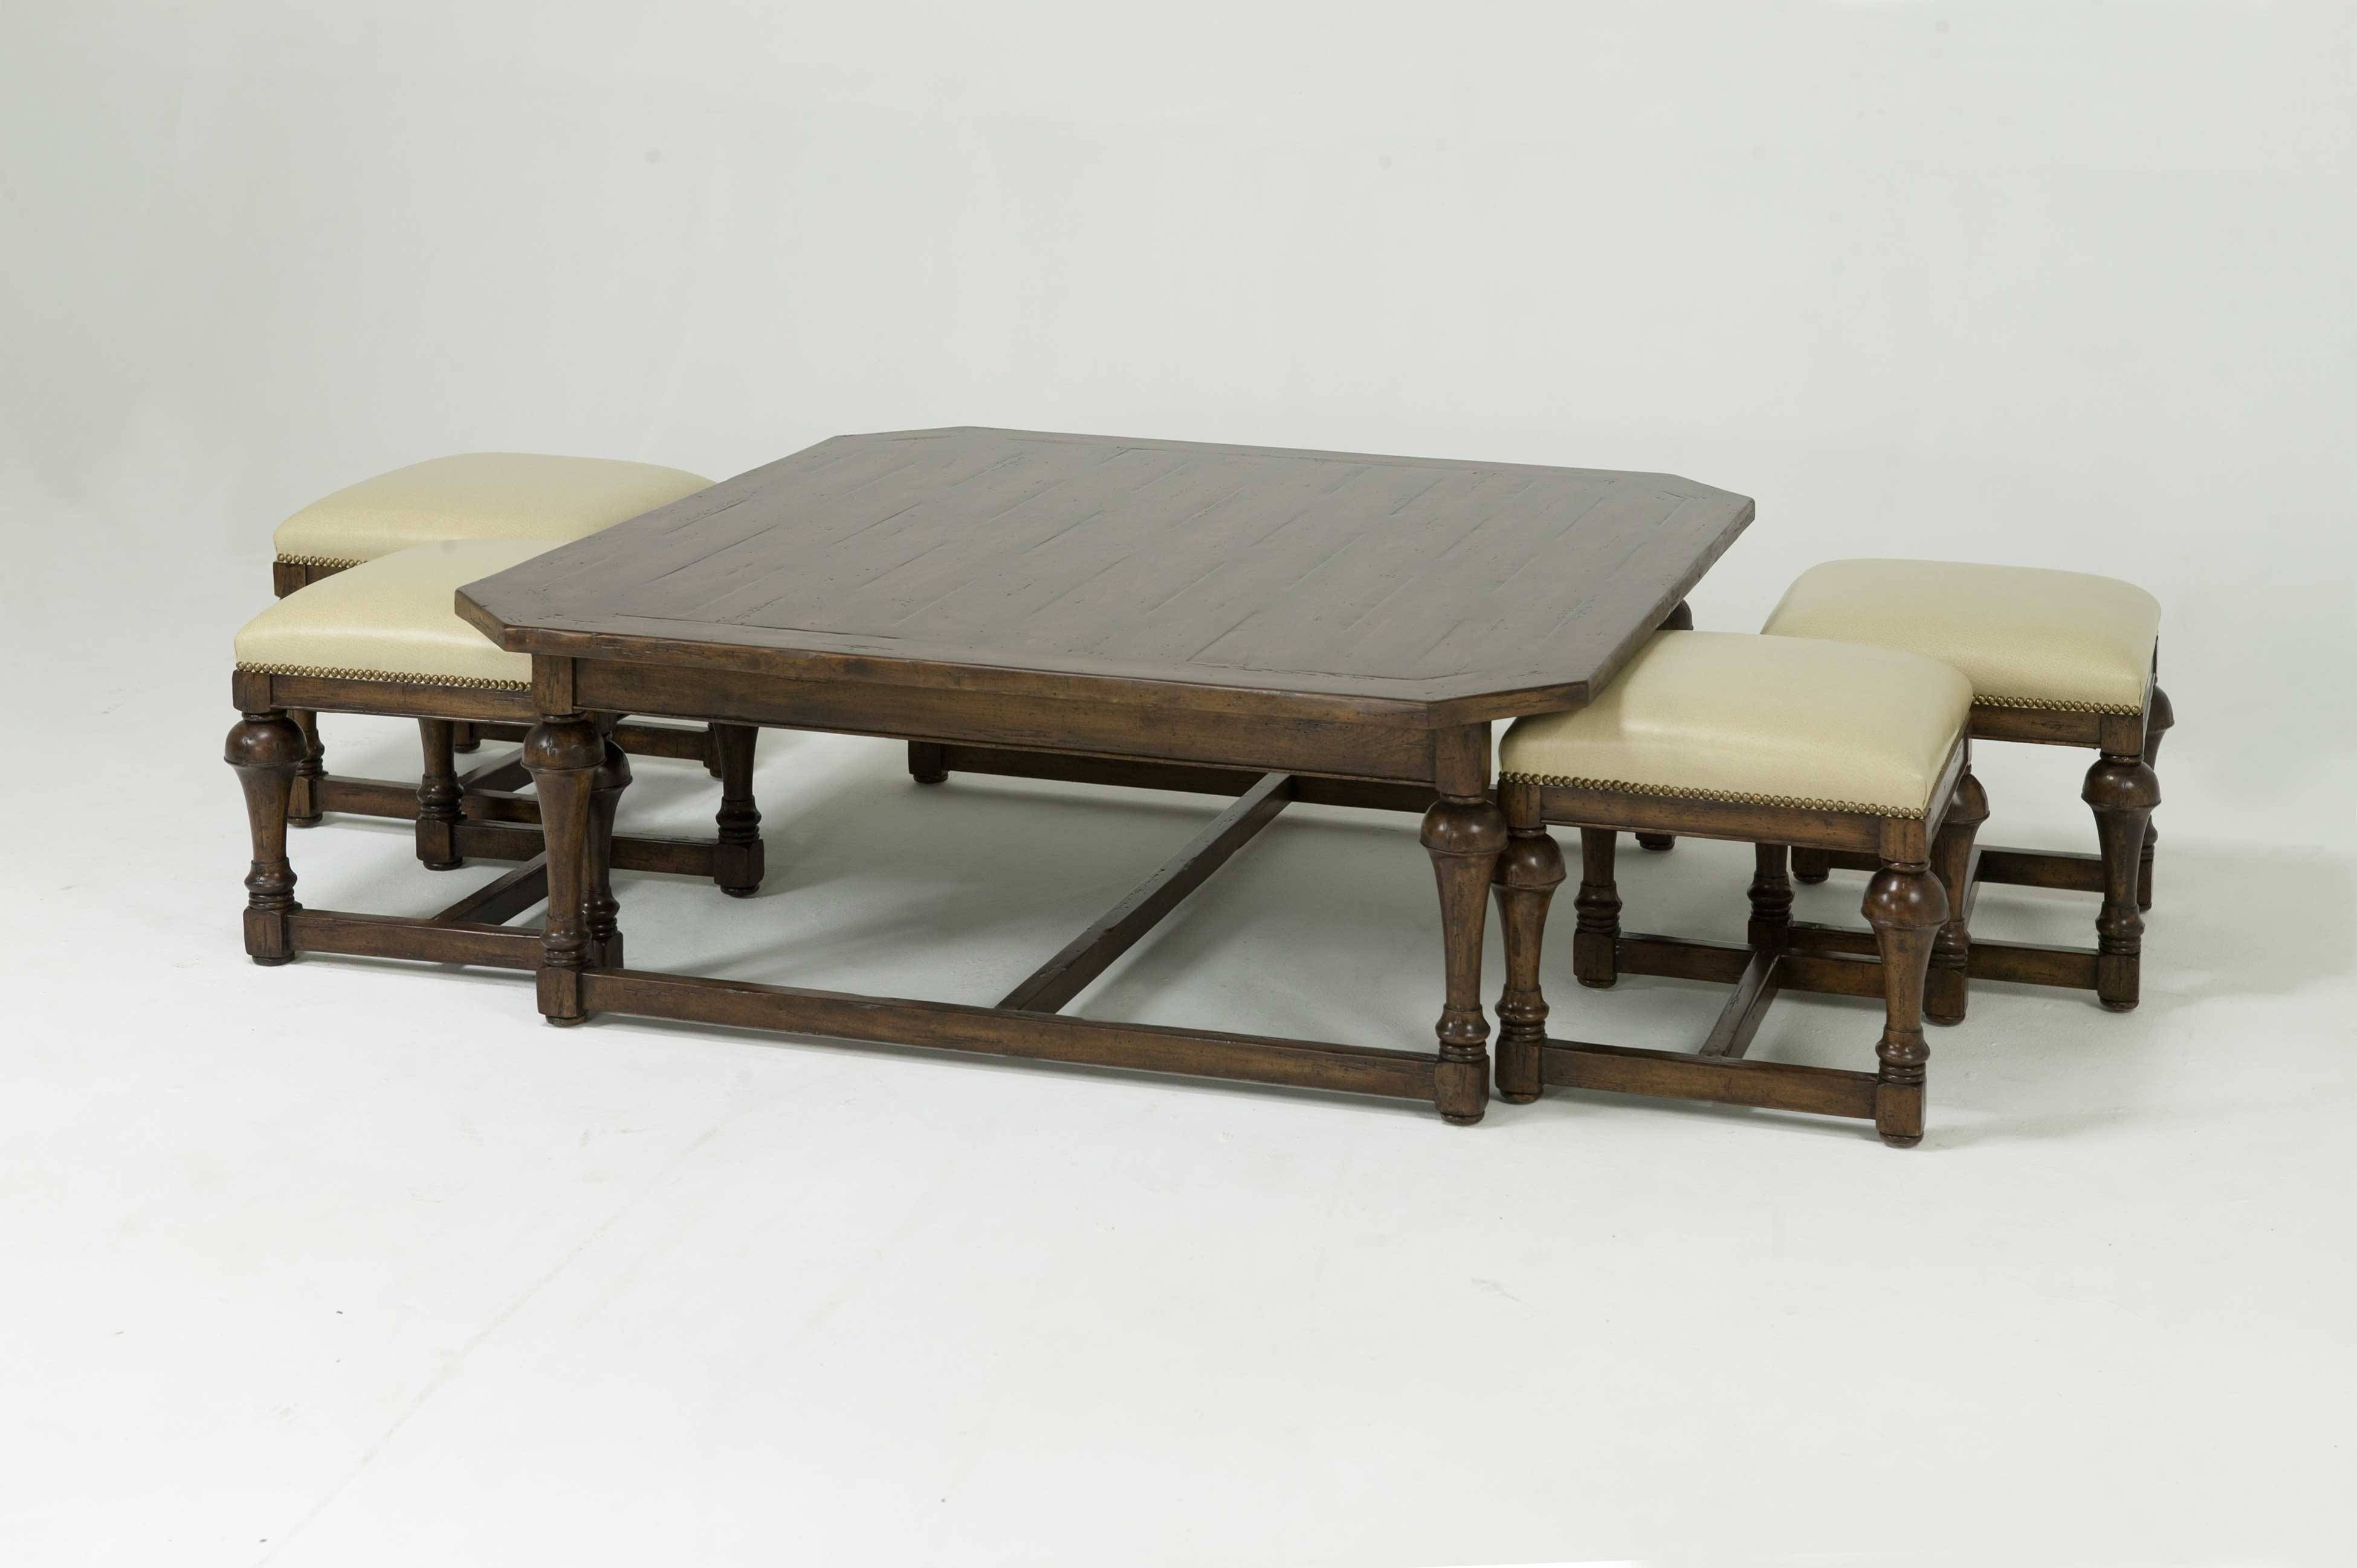 Furniture: Luxury Coffee Table With Stools For Living Room With Hardwood Coffee Tables With Storage (View 26 of 30)